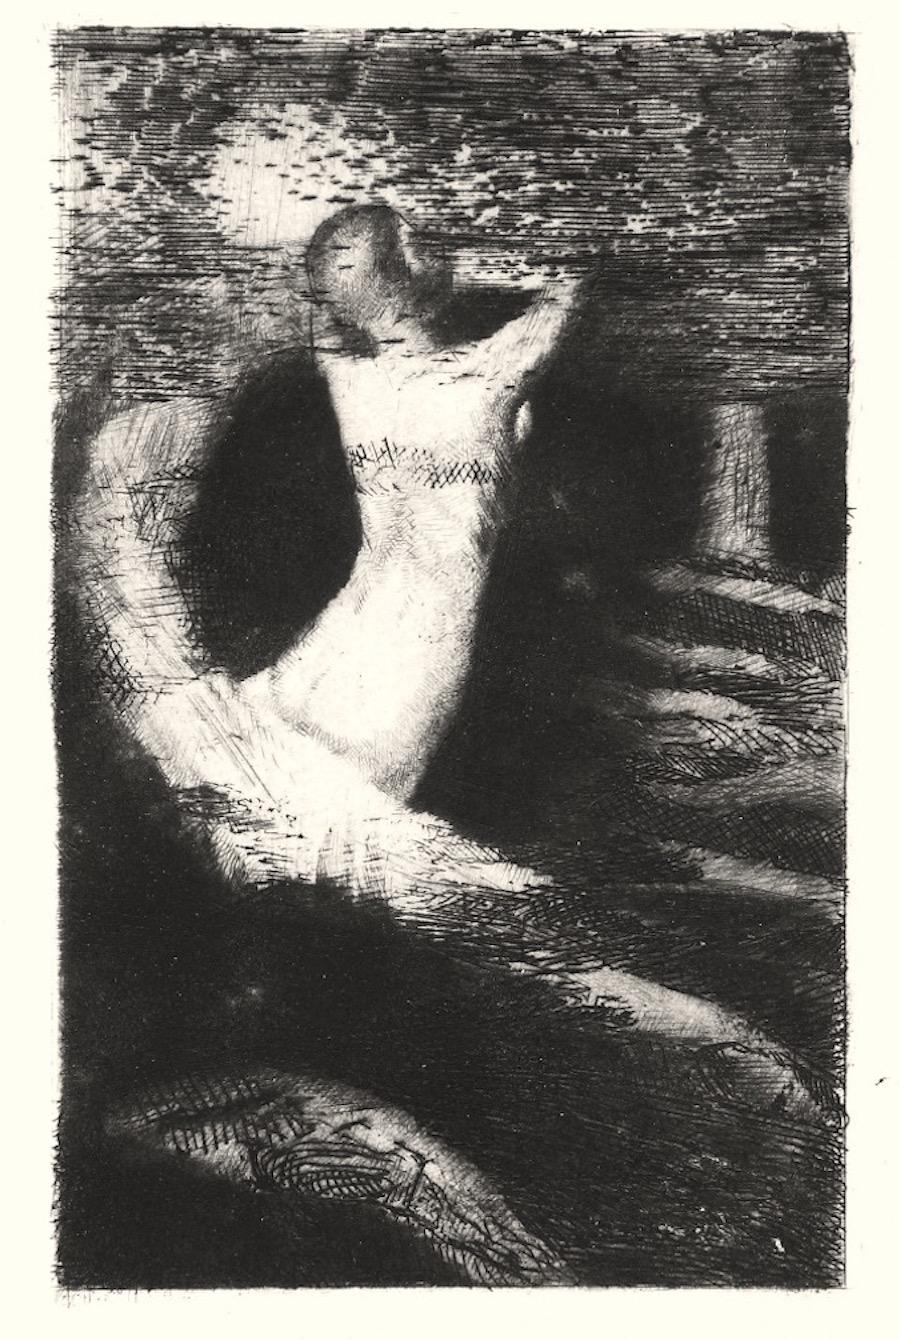 Passage d'une Ame - Etching by O. Redon - 1891